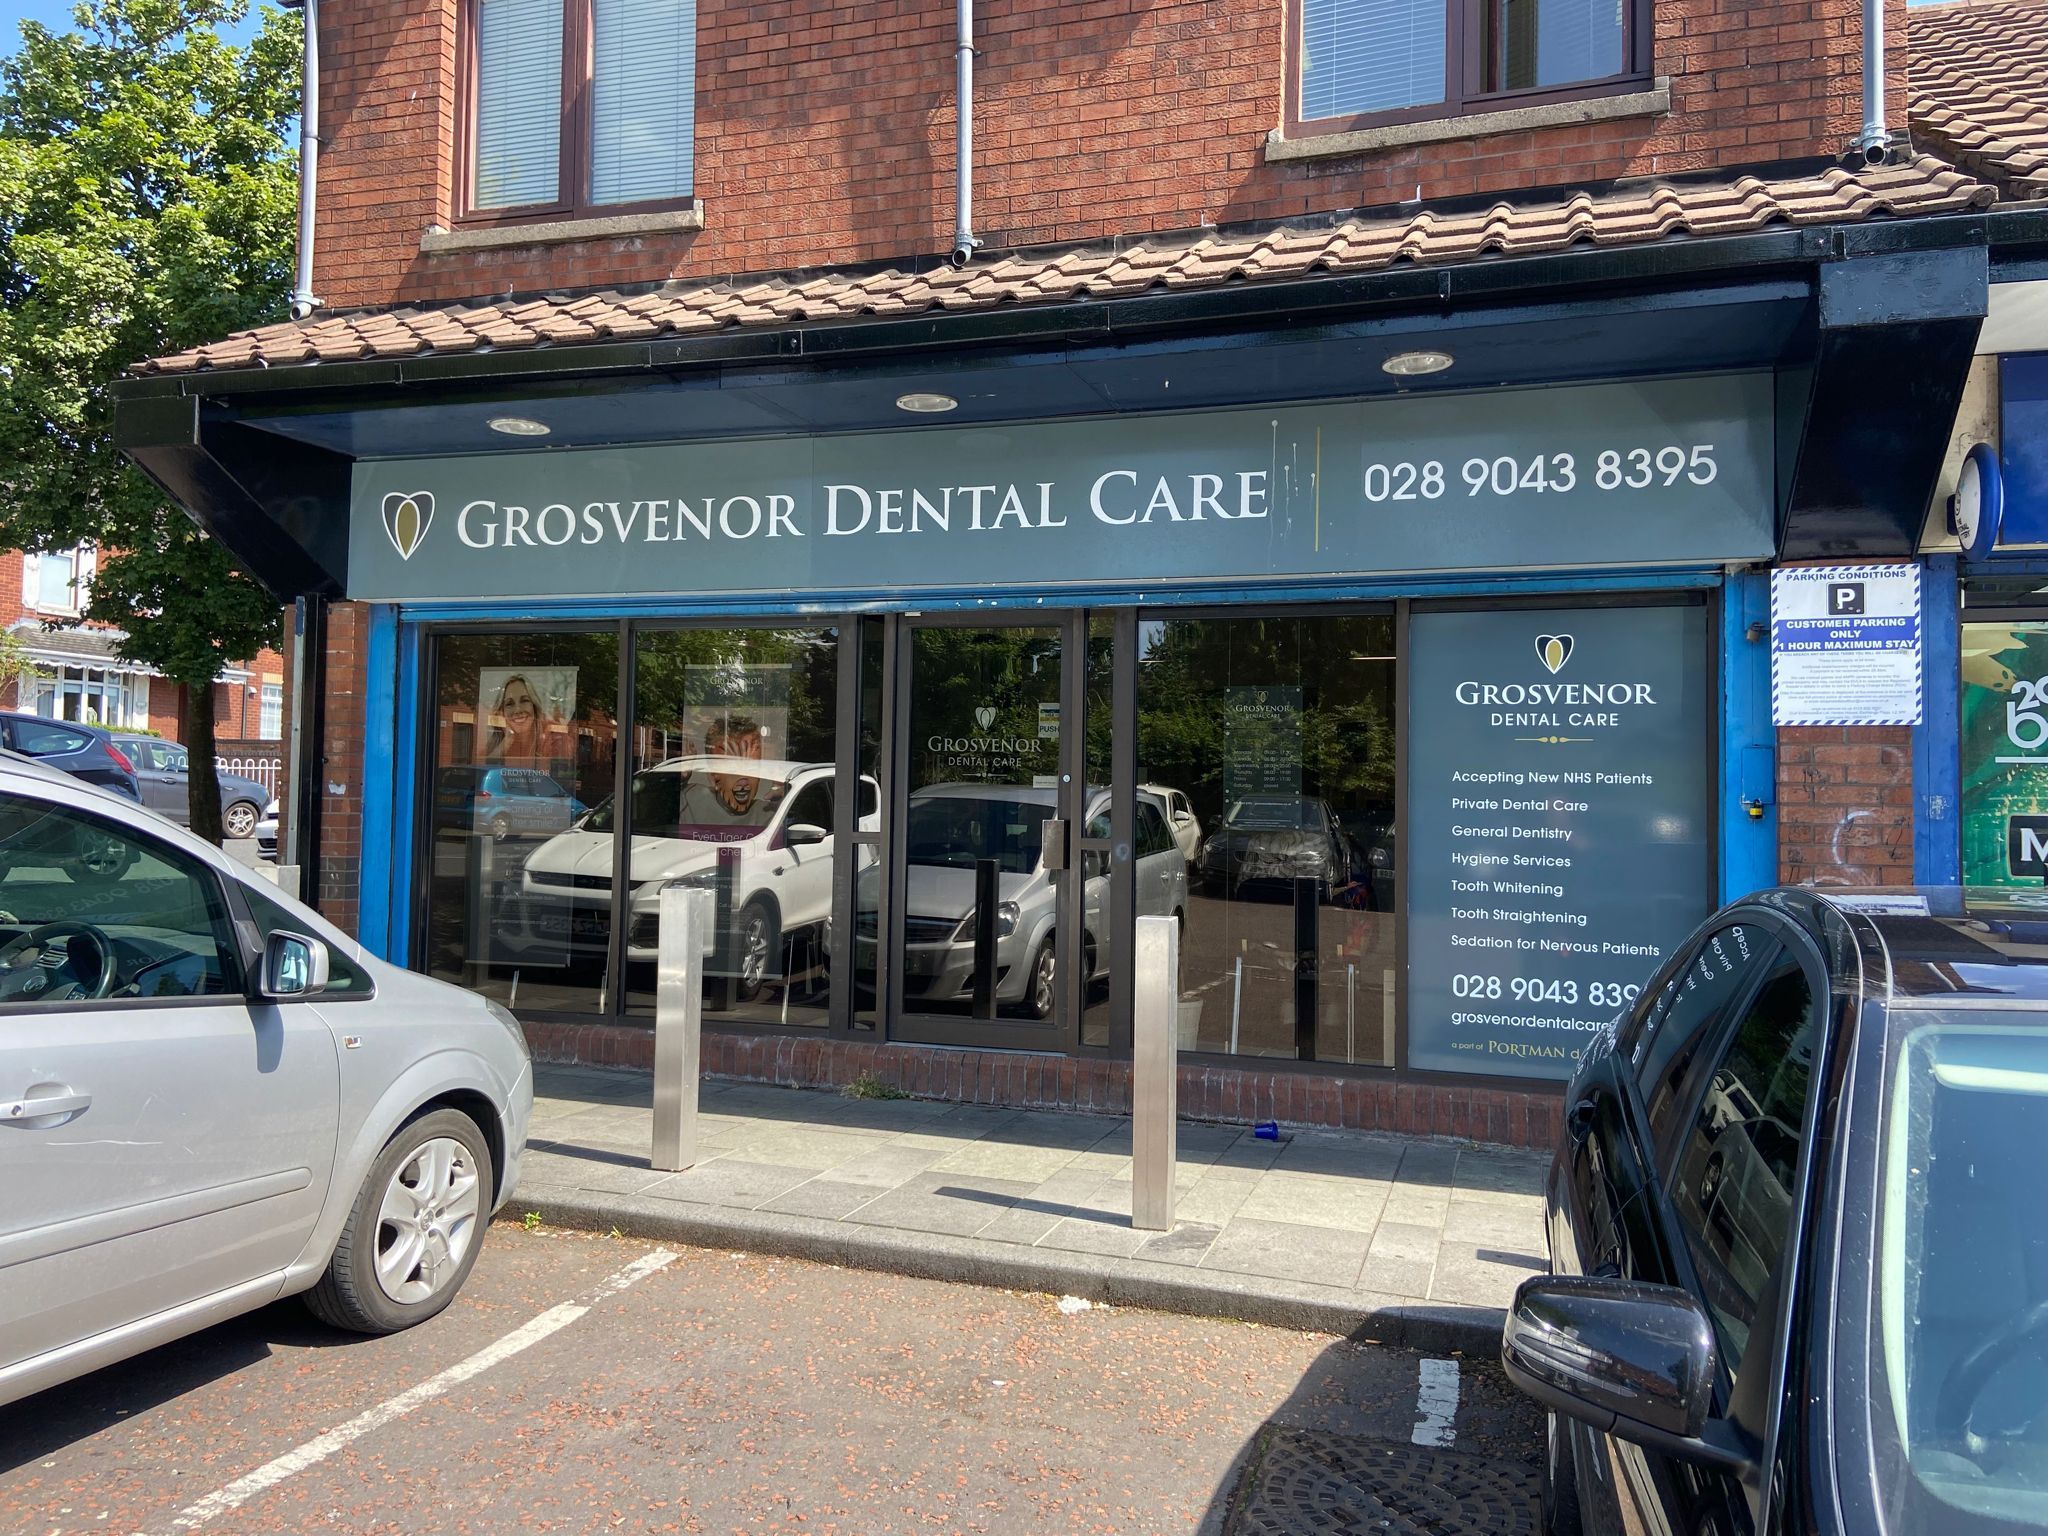 MOVE: West Belfast NHS Dental Patients have secured places in local practices following the closure announcement of Grosvenor Dental Care